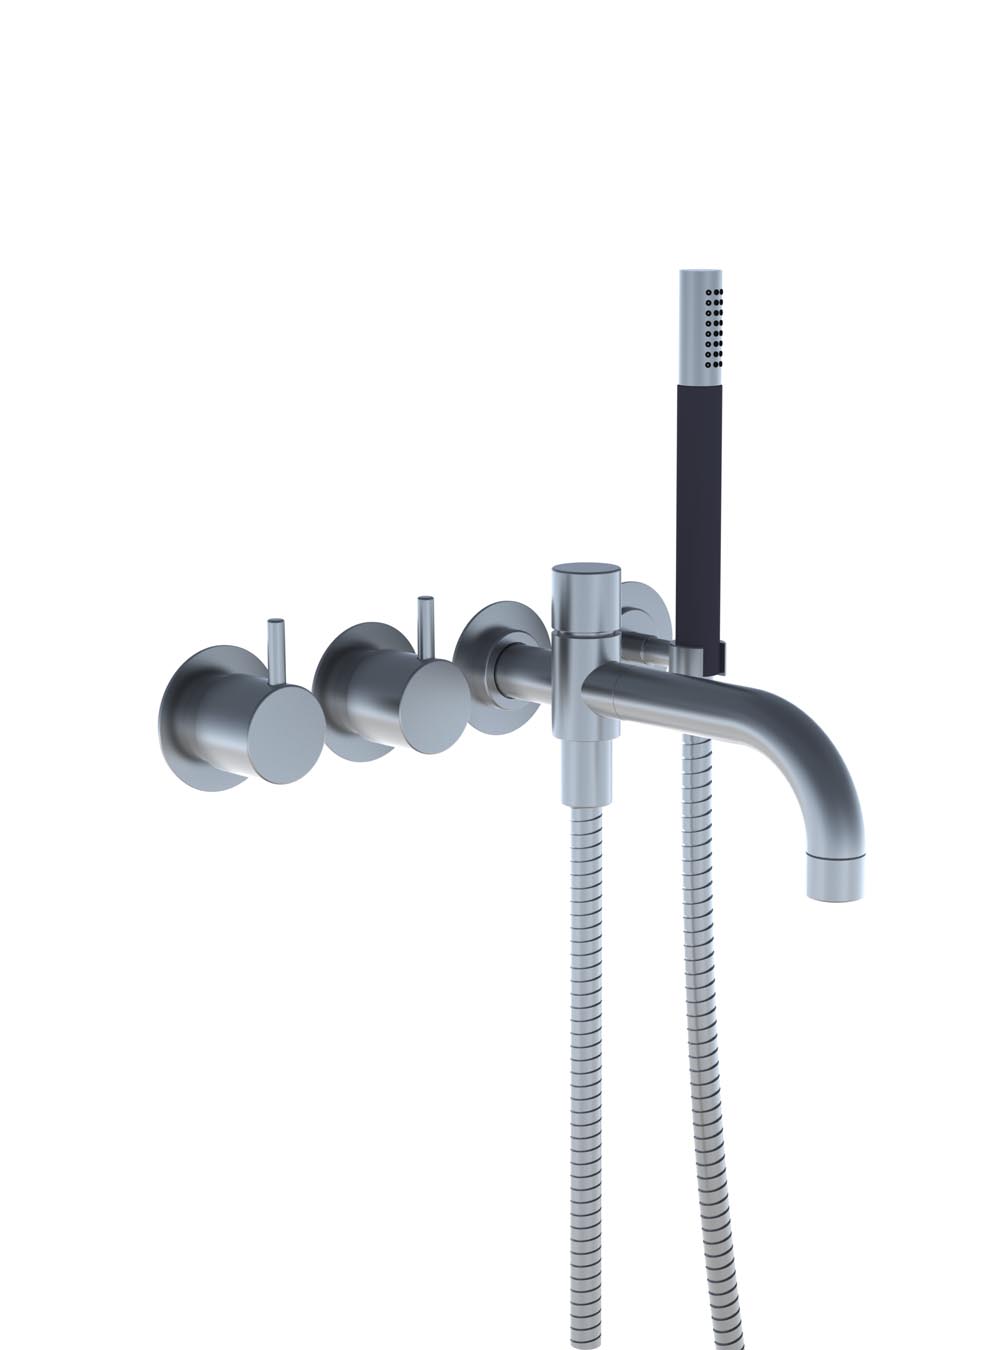 641DT8: Two-handle build-in mixer with ¼ turn ceramic disc technology.	641DT8UP = Build-in mixer 600.				...